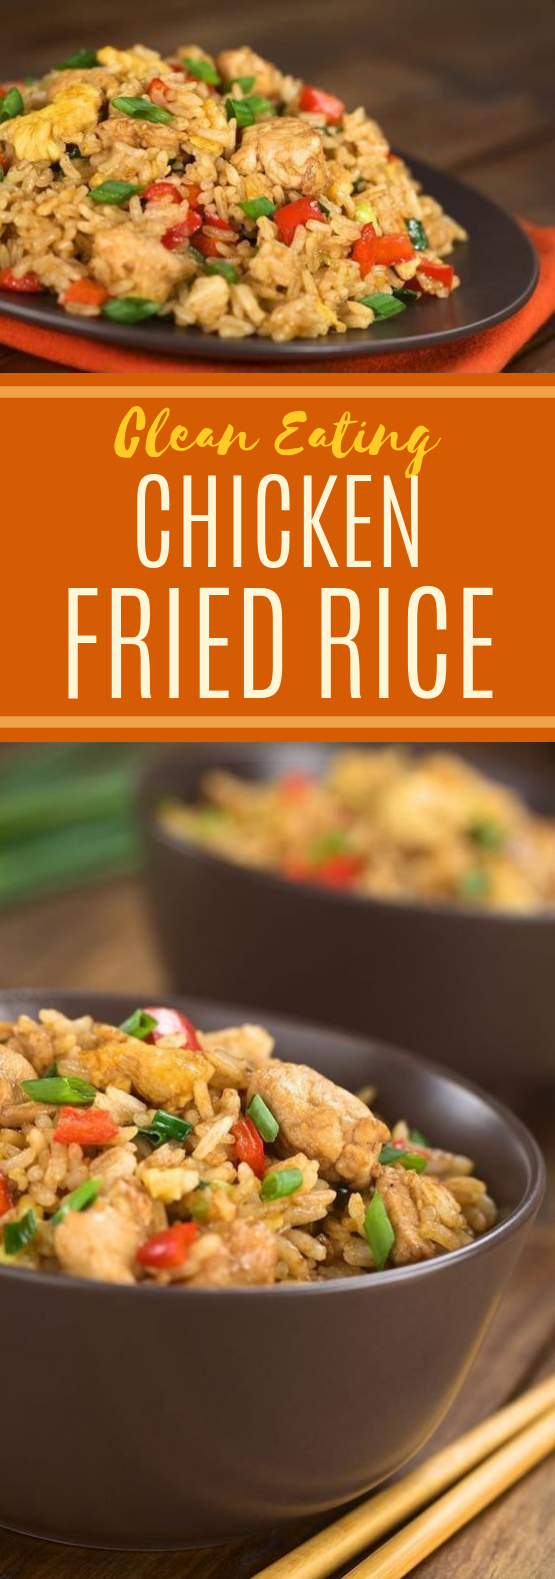 Clean Eating Chicken Fried Rice #healthy #cleaneating